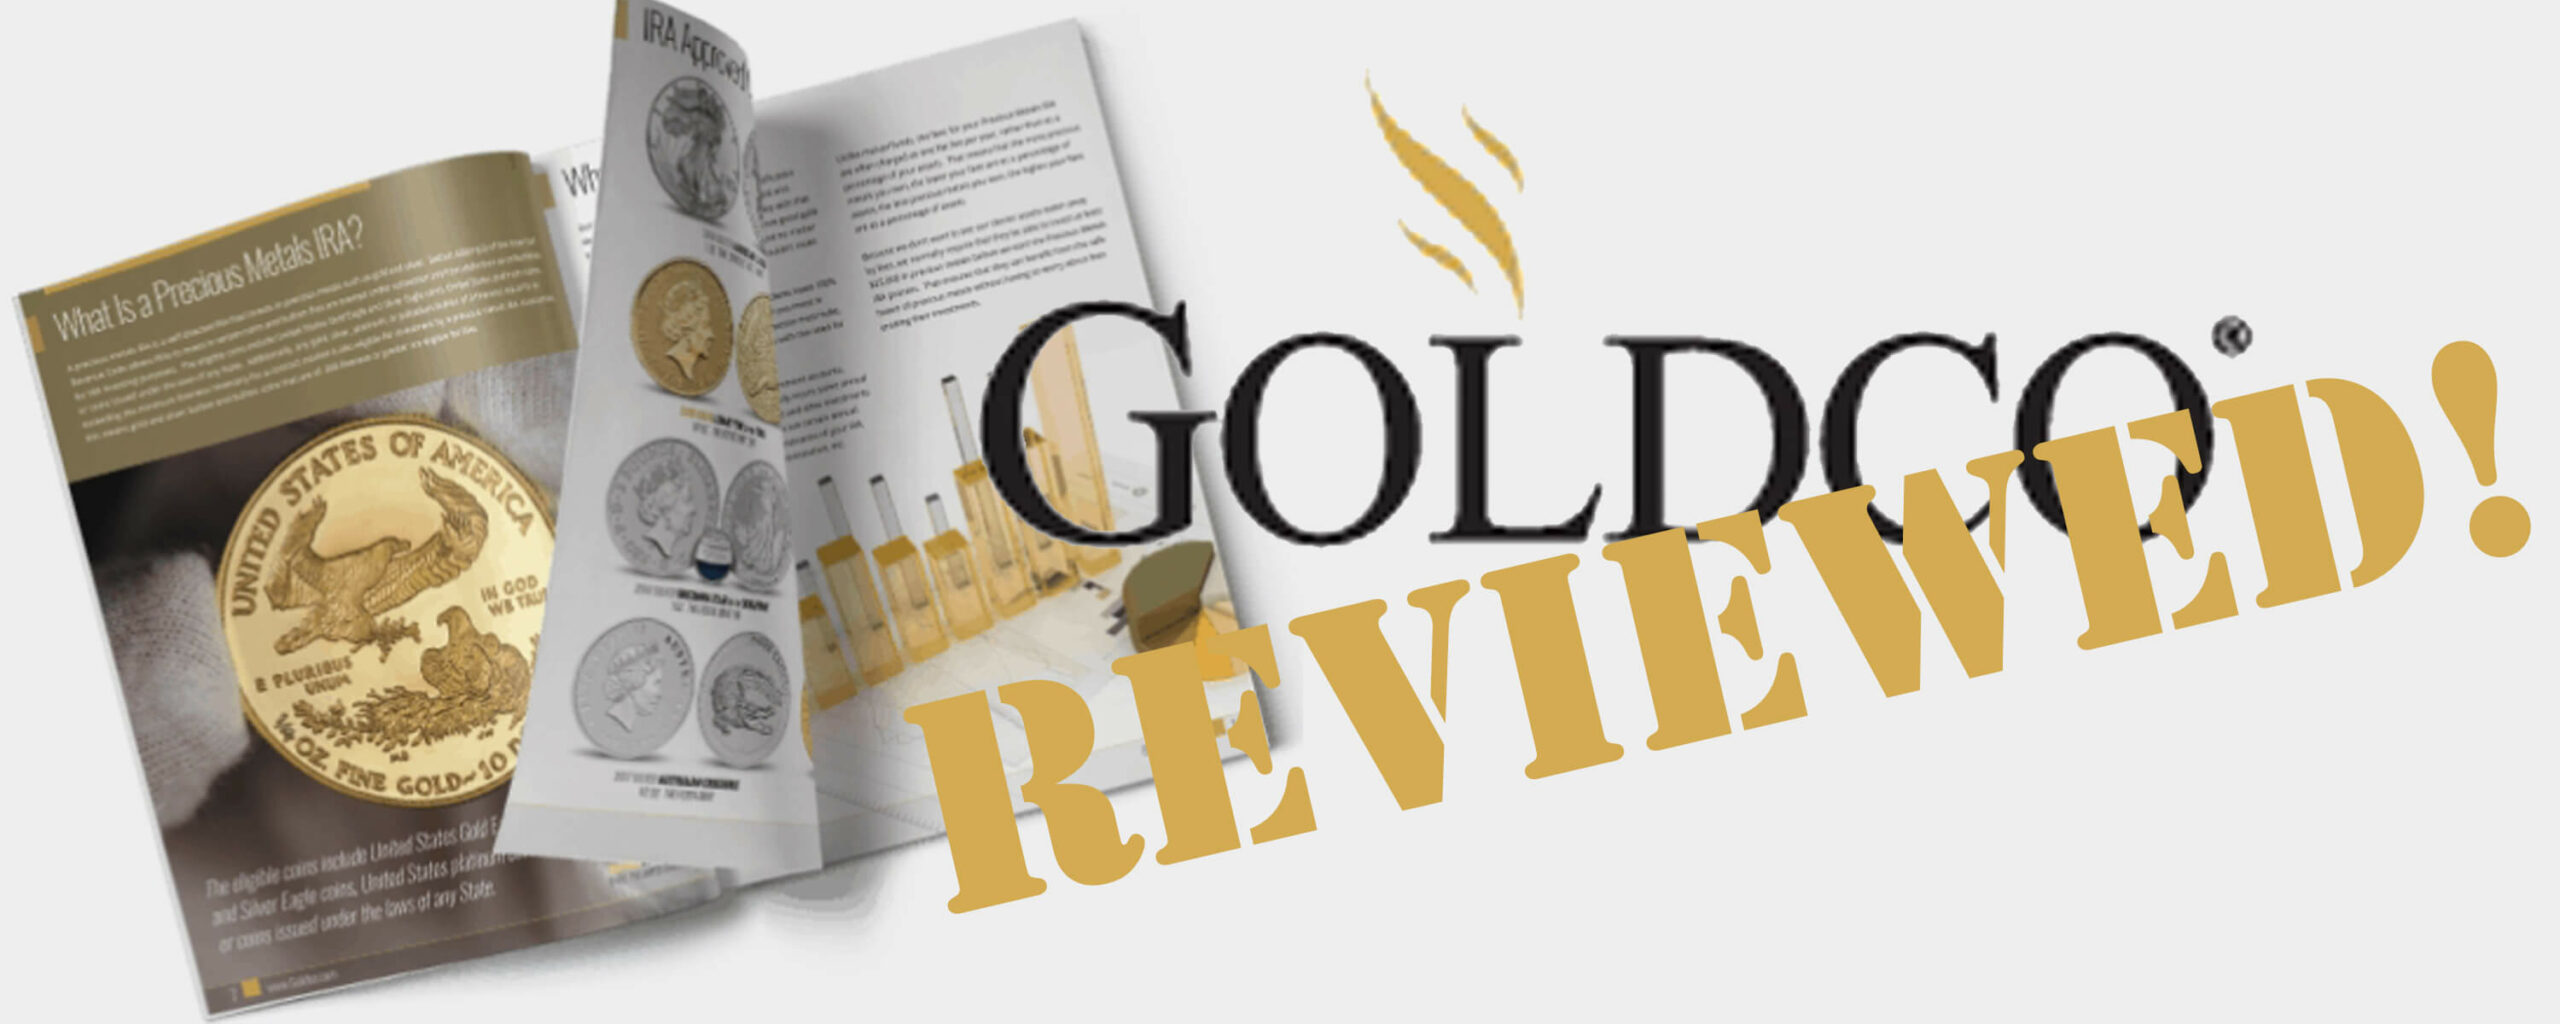 Goldco 2022 Honest Review - Read This Before You Join!